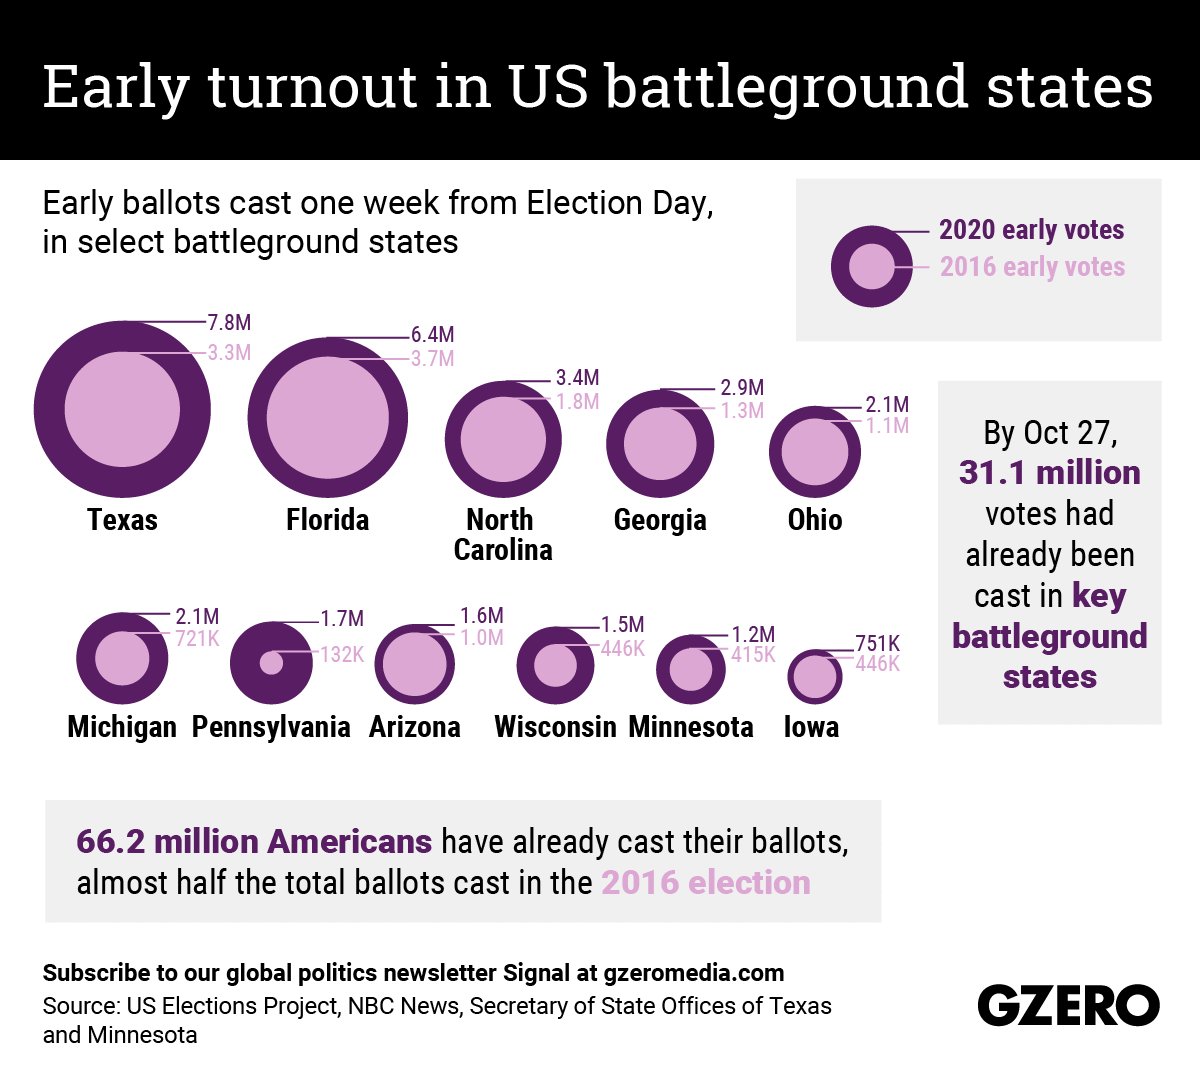 The Graphic Truth: Early turnout in US battleground states